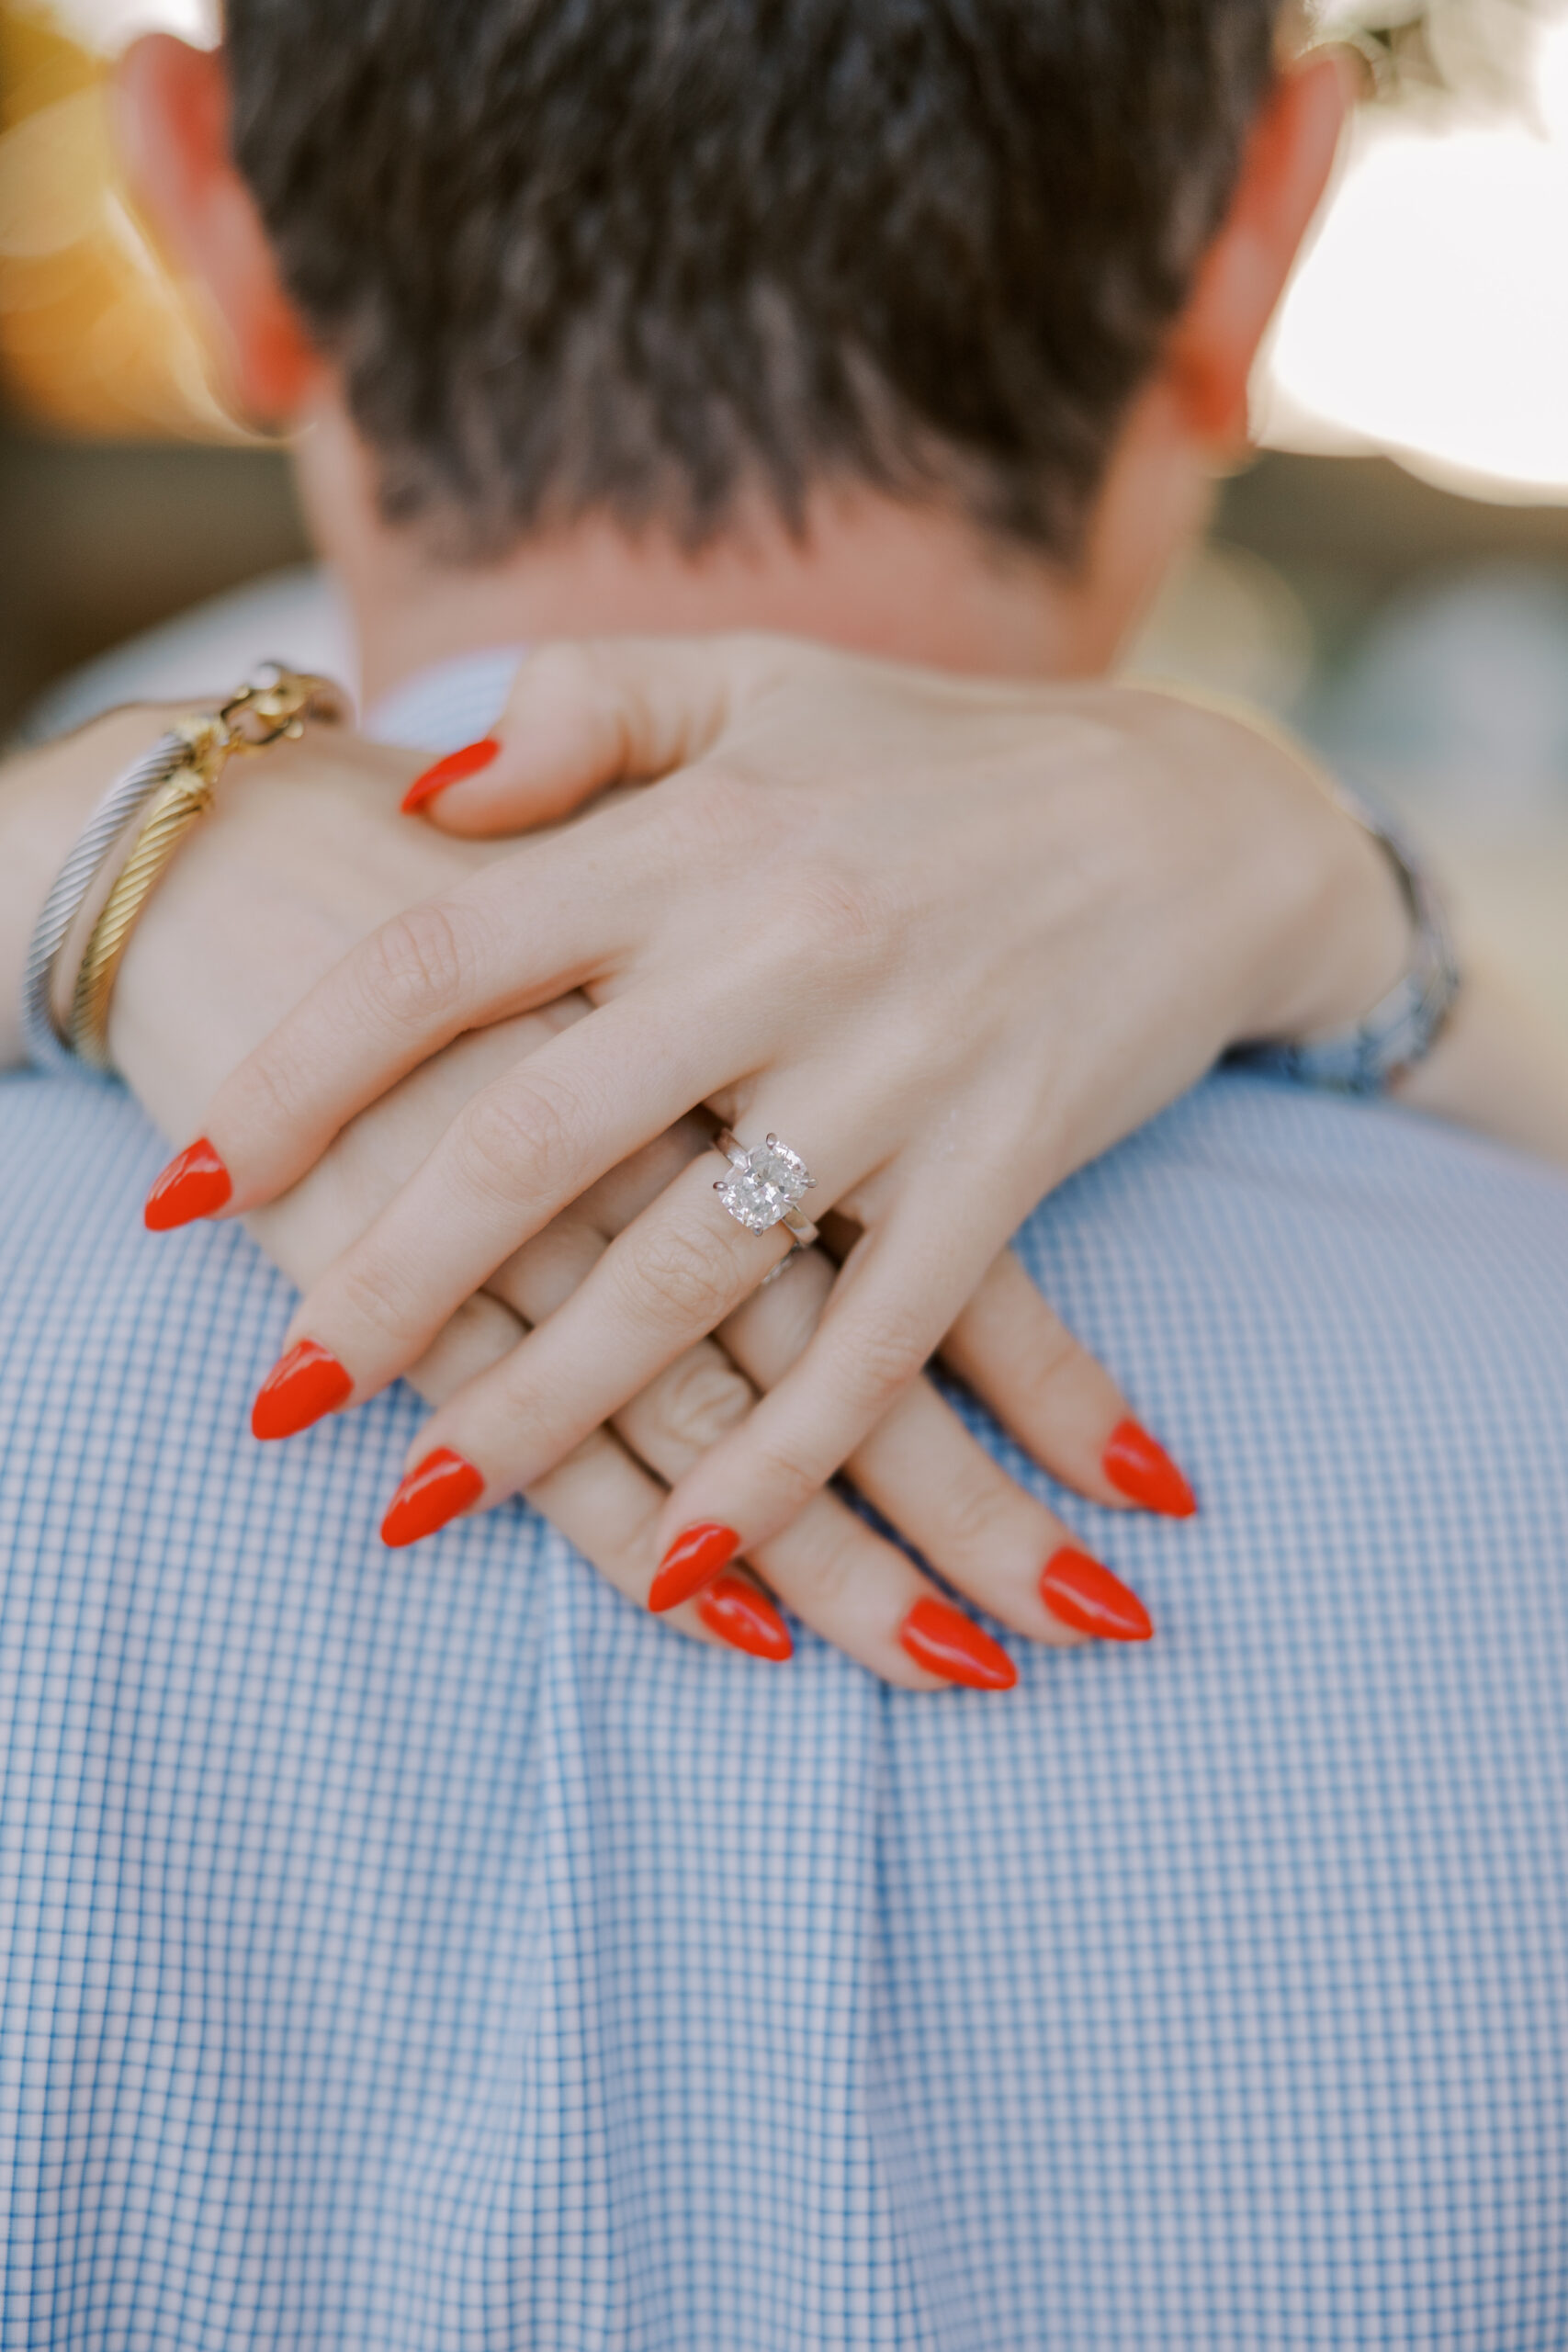 close up photo of woman's hands while she is embracing her fiance, her nails are red and she has a gold and diamond engagement ring on her finger